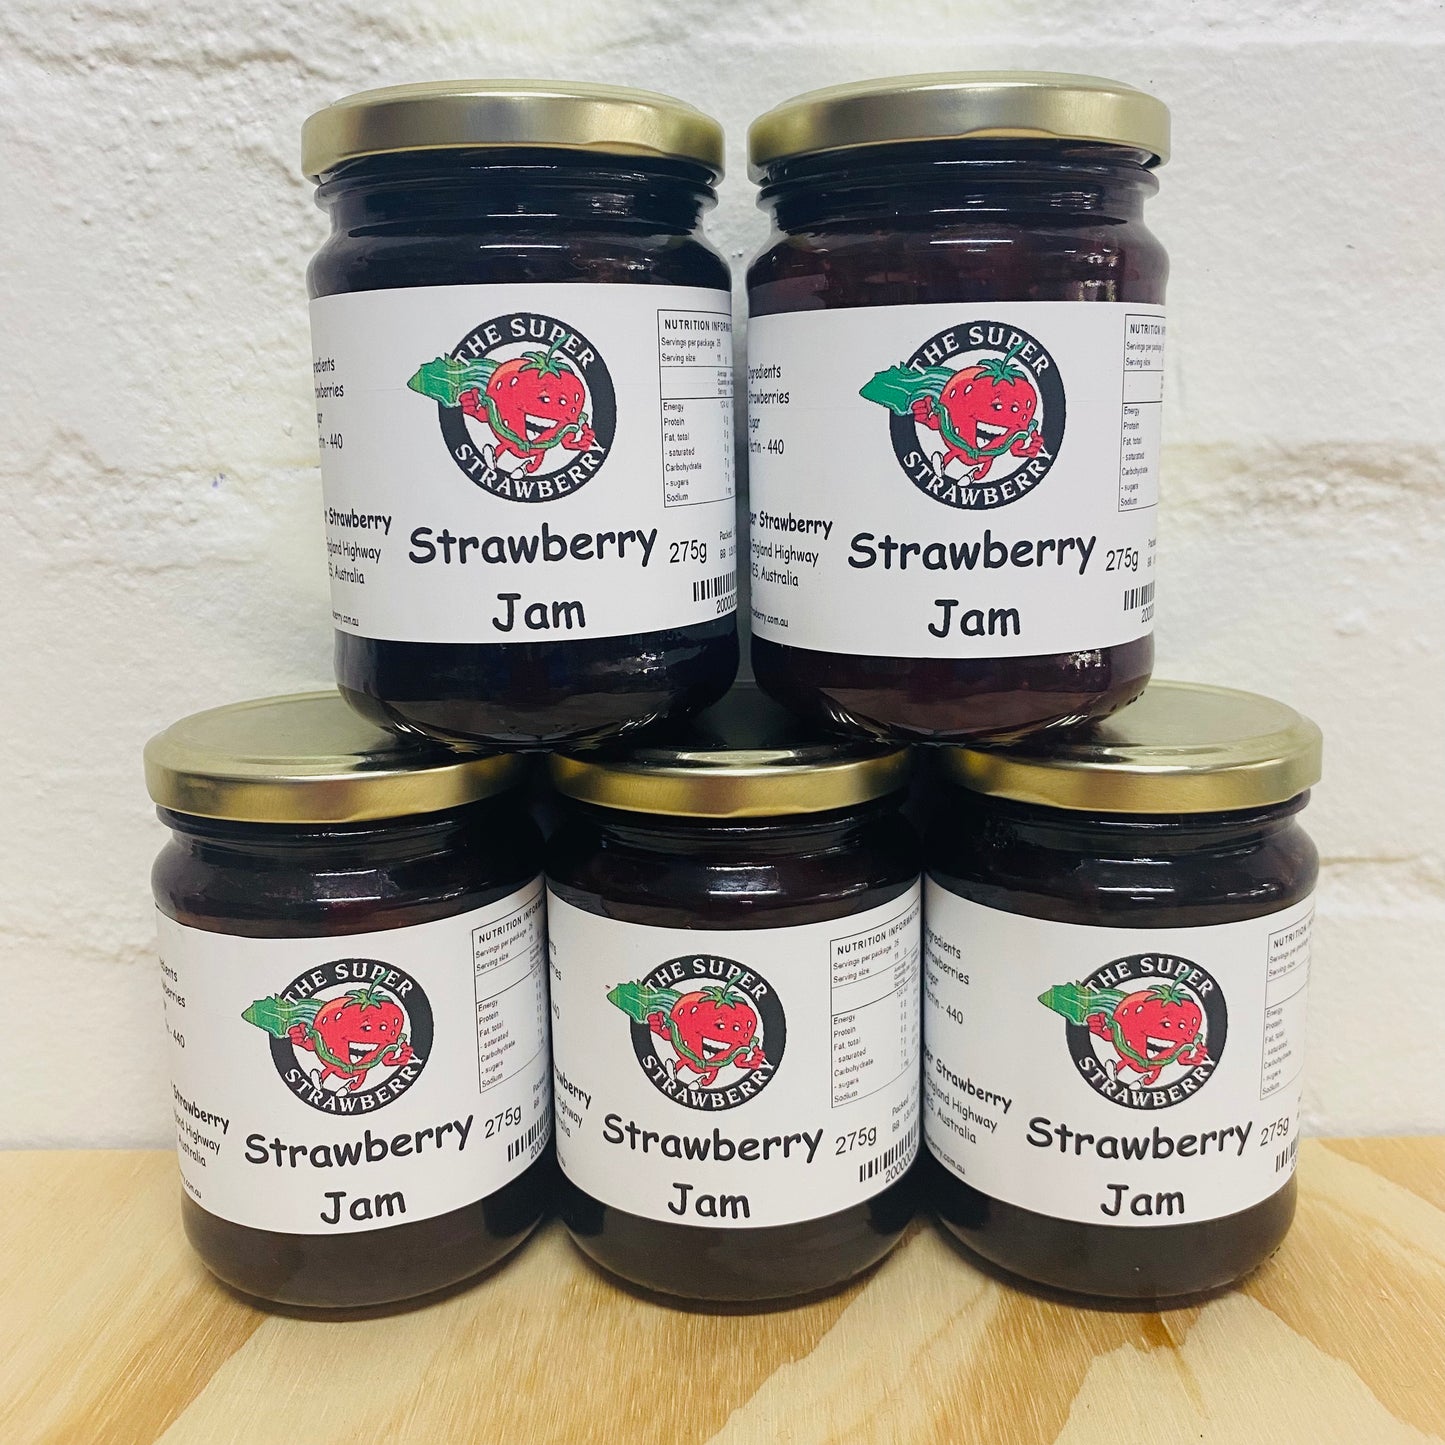 Strawberry Jam by The Super Strawberry